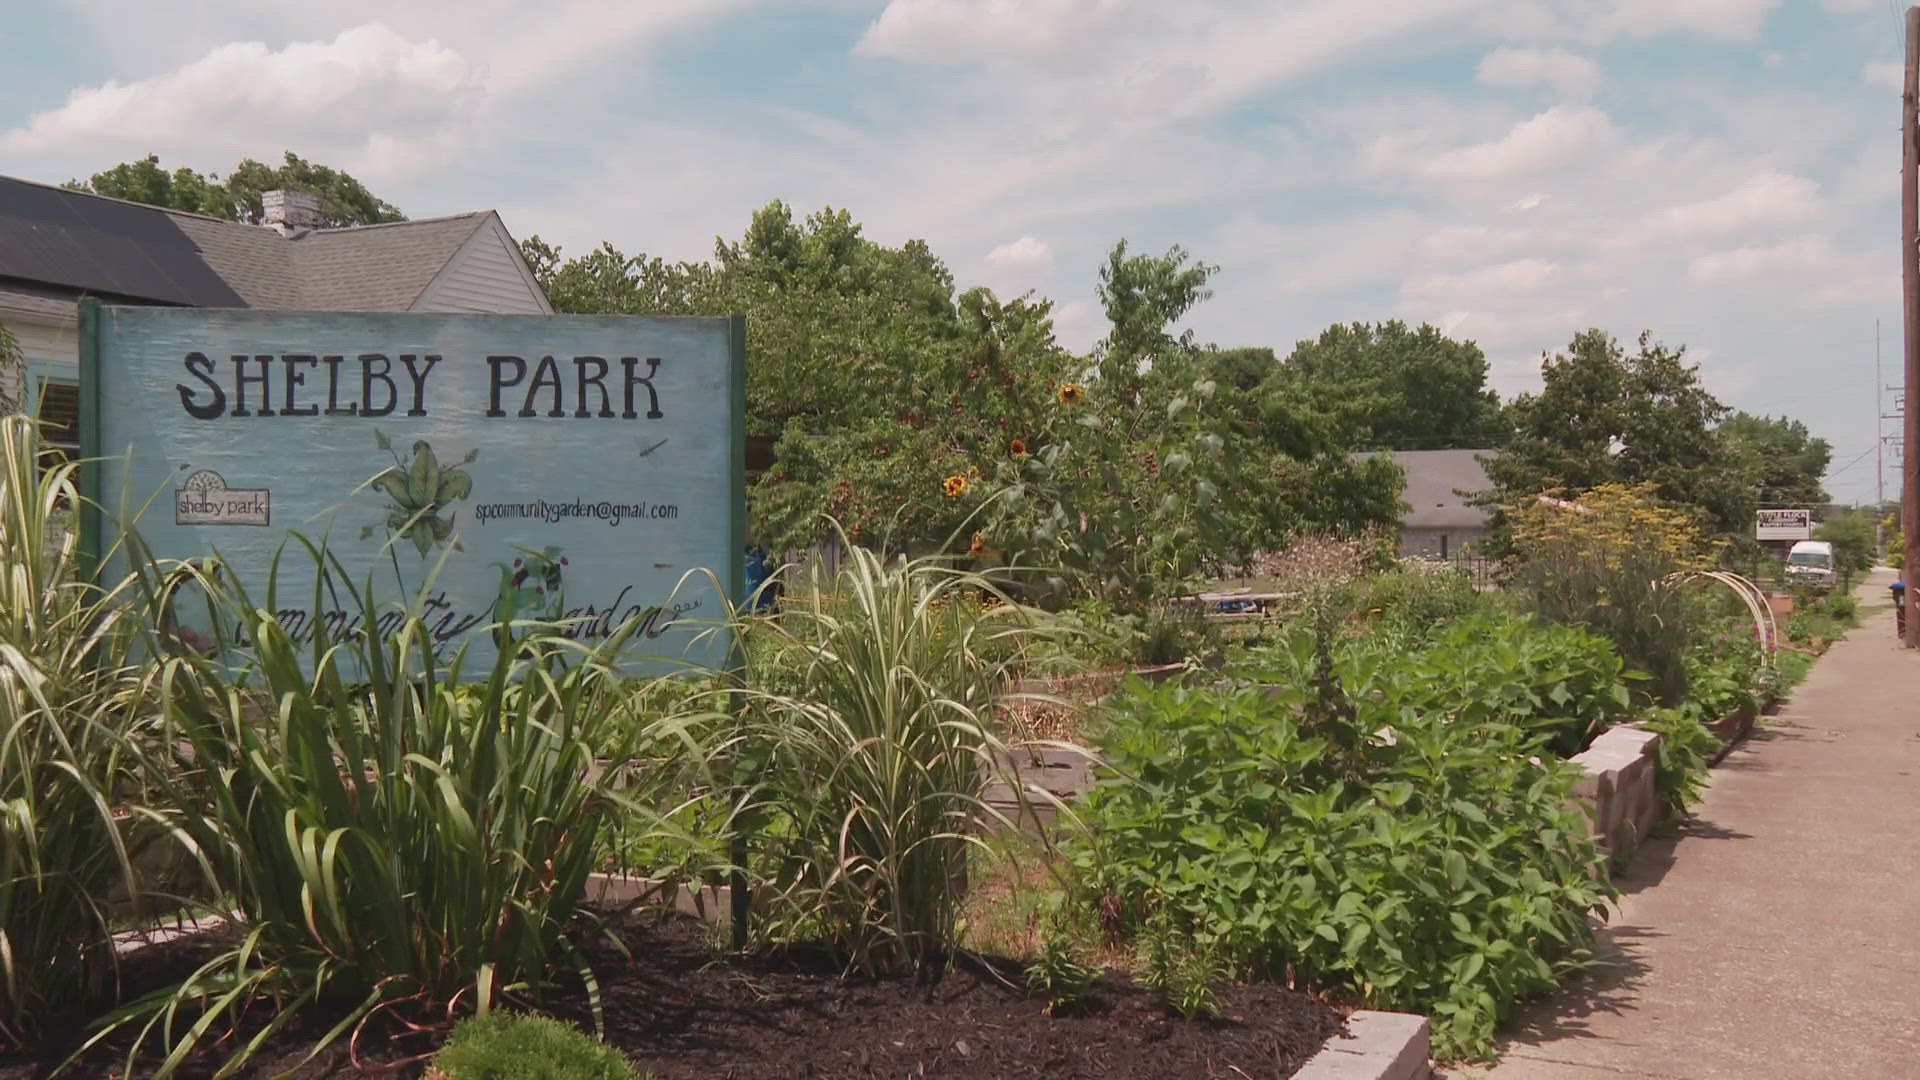 The Soil and Water Conservation District is responsible for the rain barrels at the community garden in Shelby Park, along with others across the city.